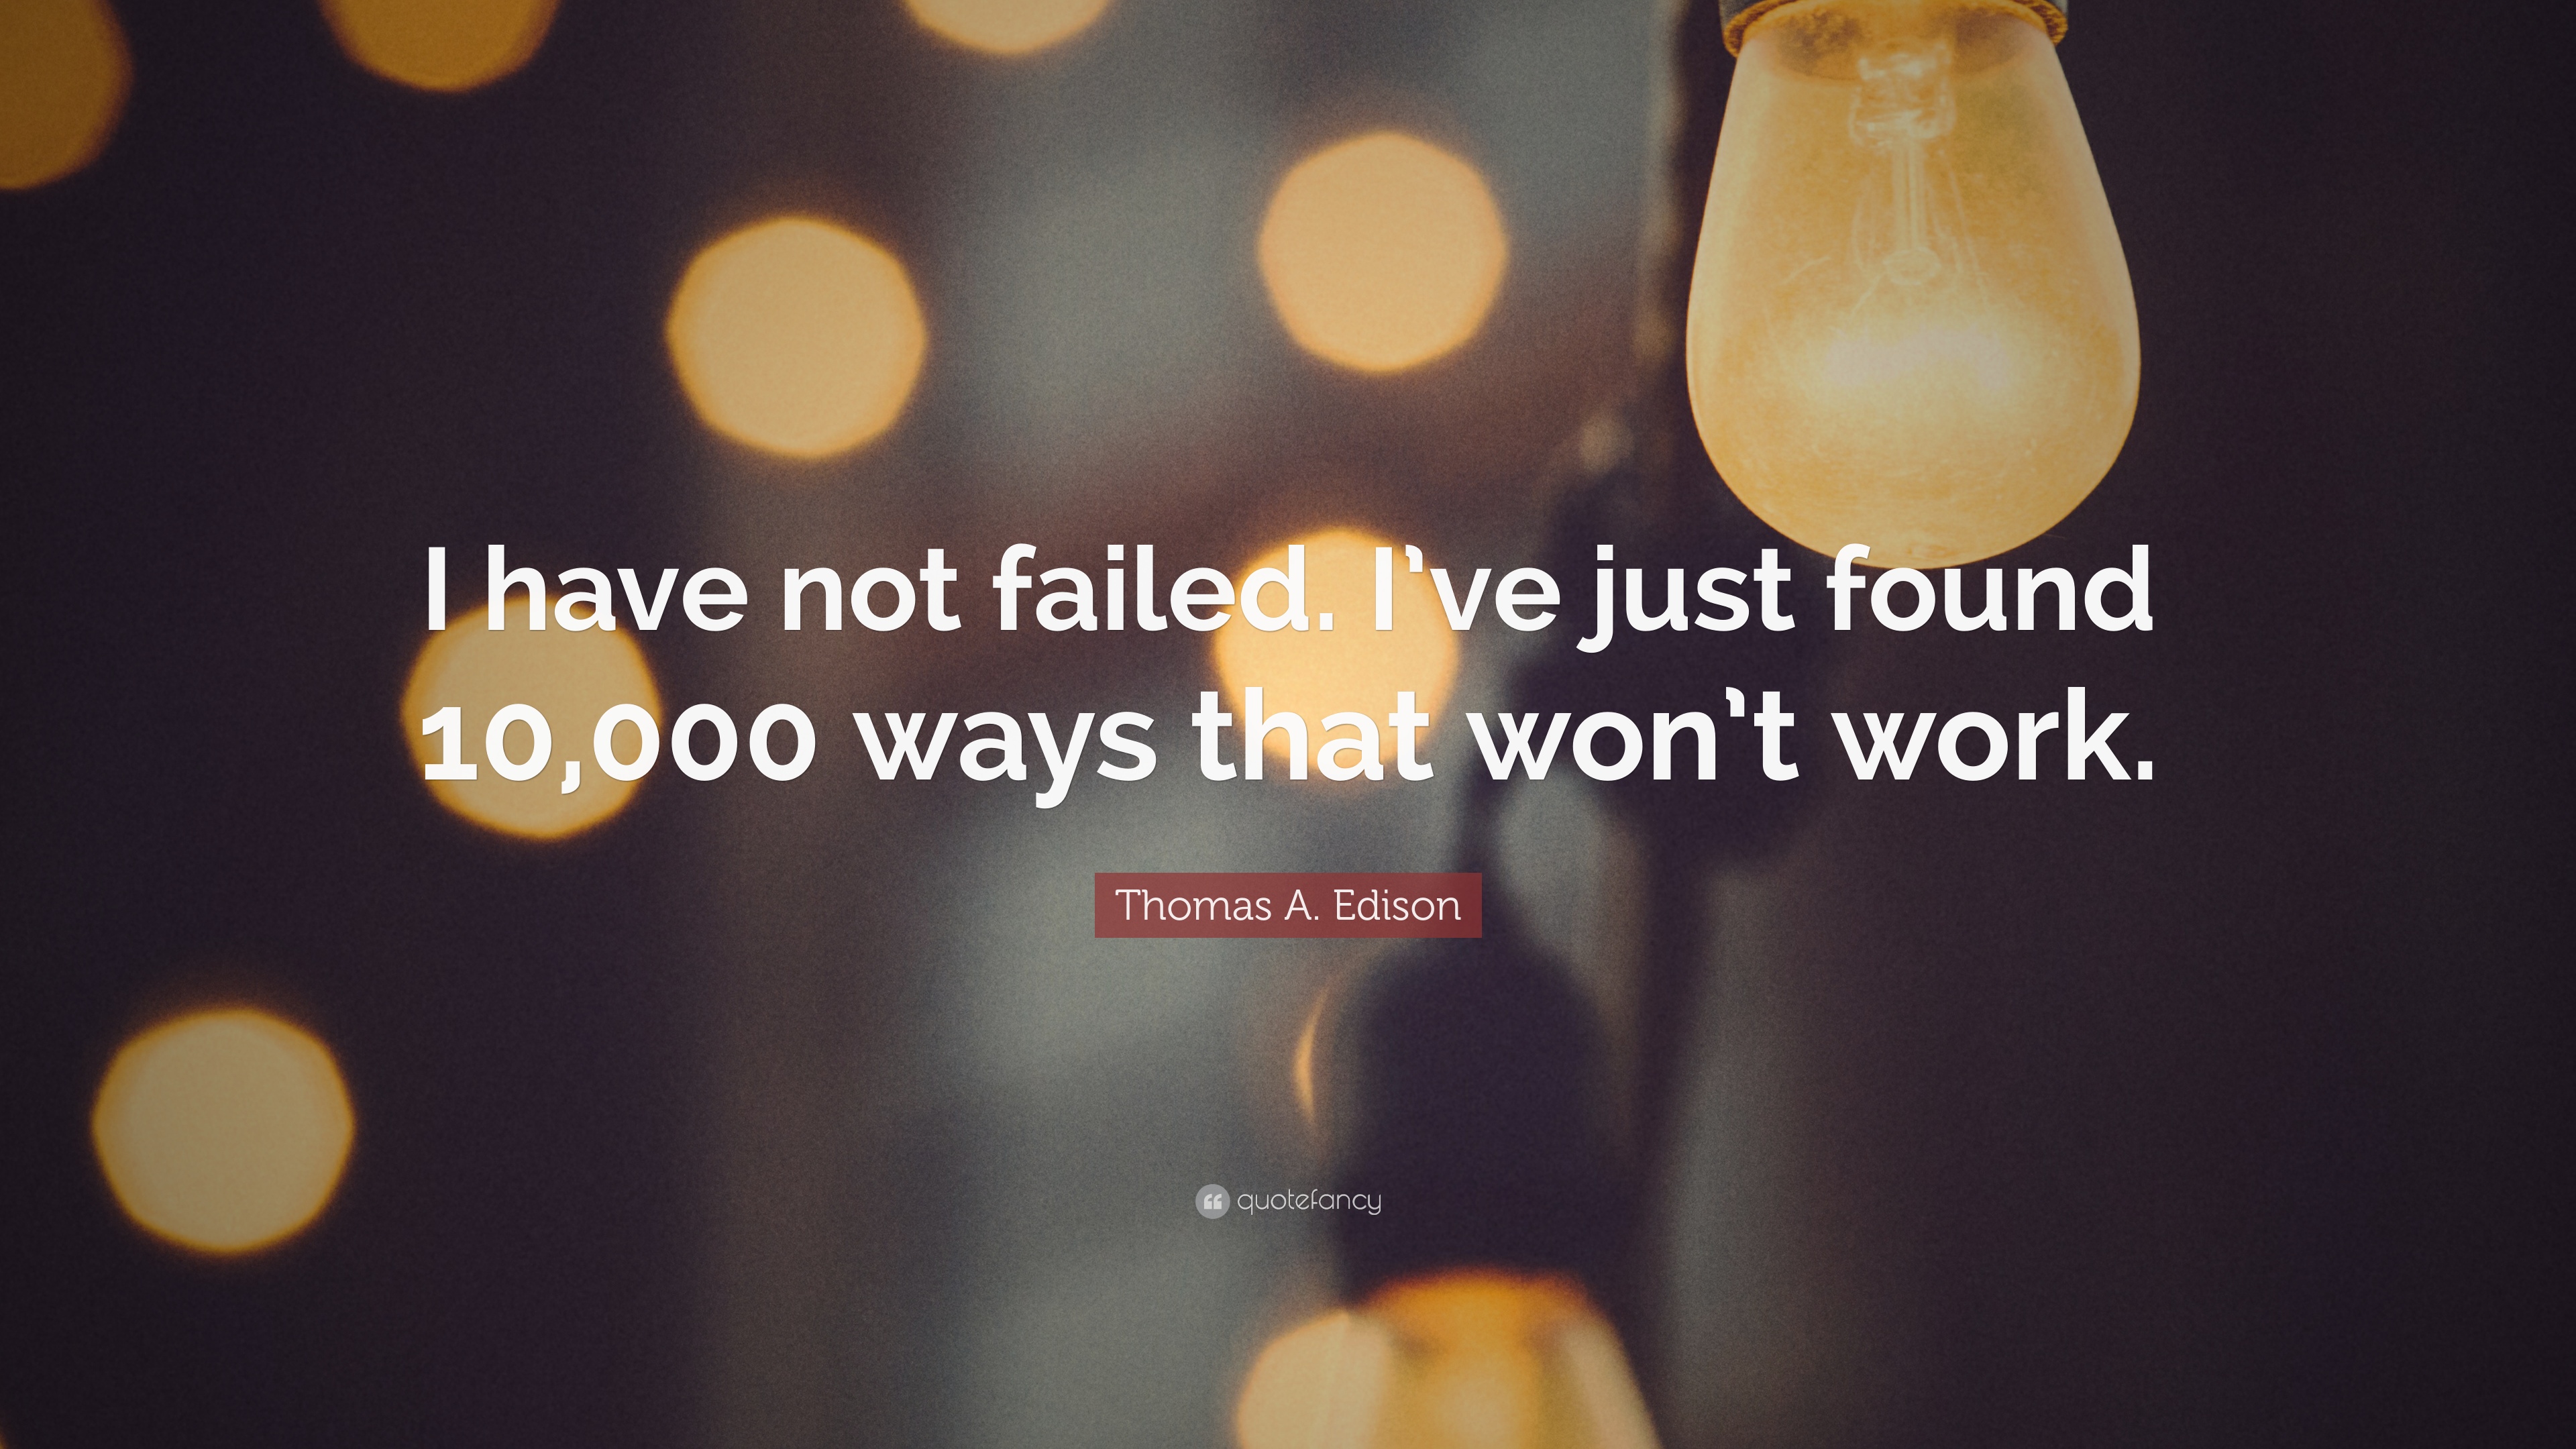 Thomas A. Edison Quote: “I have not failed. I've just found 000